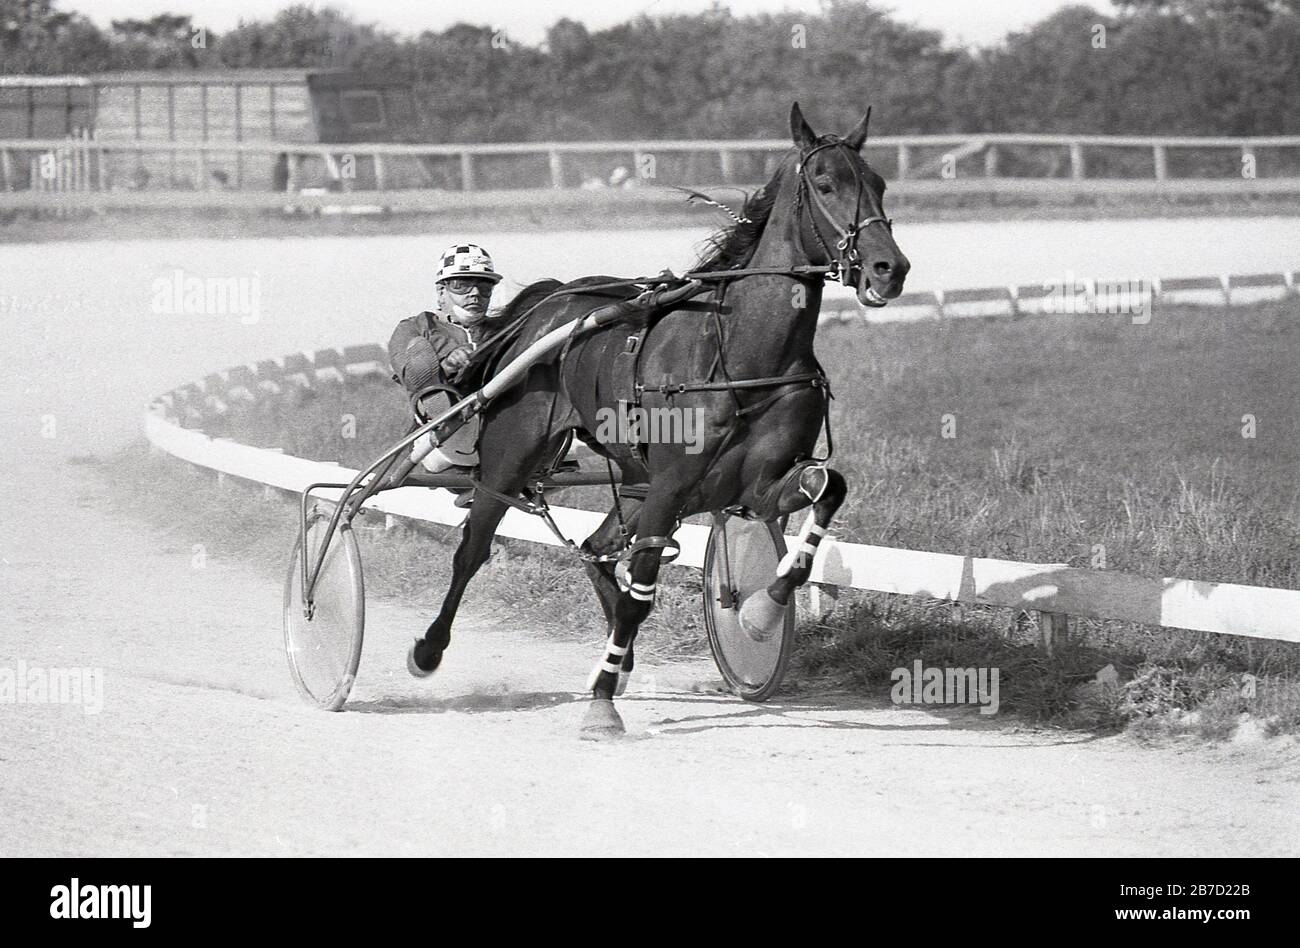 Racing Sulky Used In Harness Racing Without The Horse Stock Photo, Picture  and Royalty Free Image. Image 77450544.